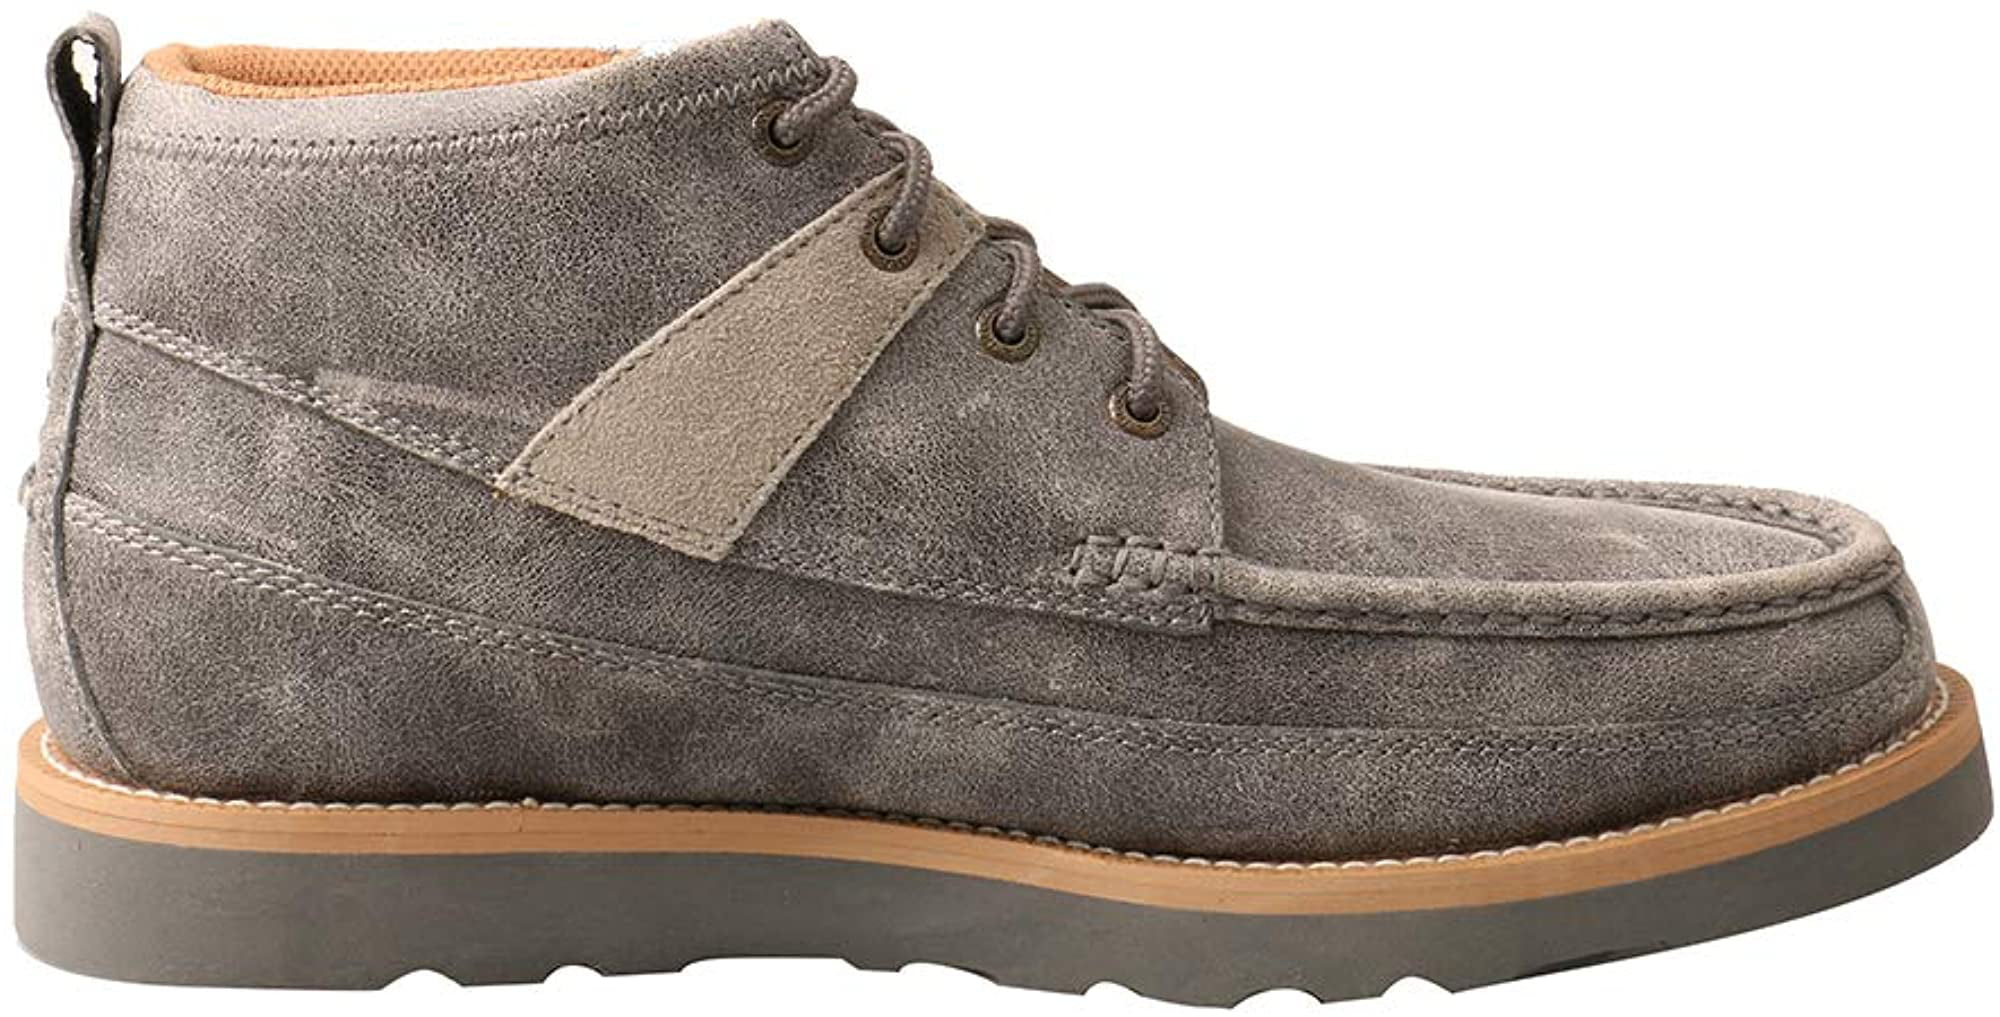 Twisted X Mens Wedge Sole Shoes Moc Toe Mca0019